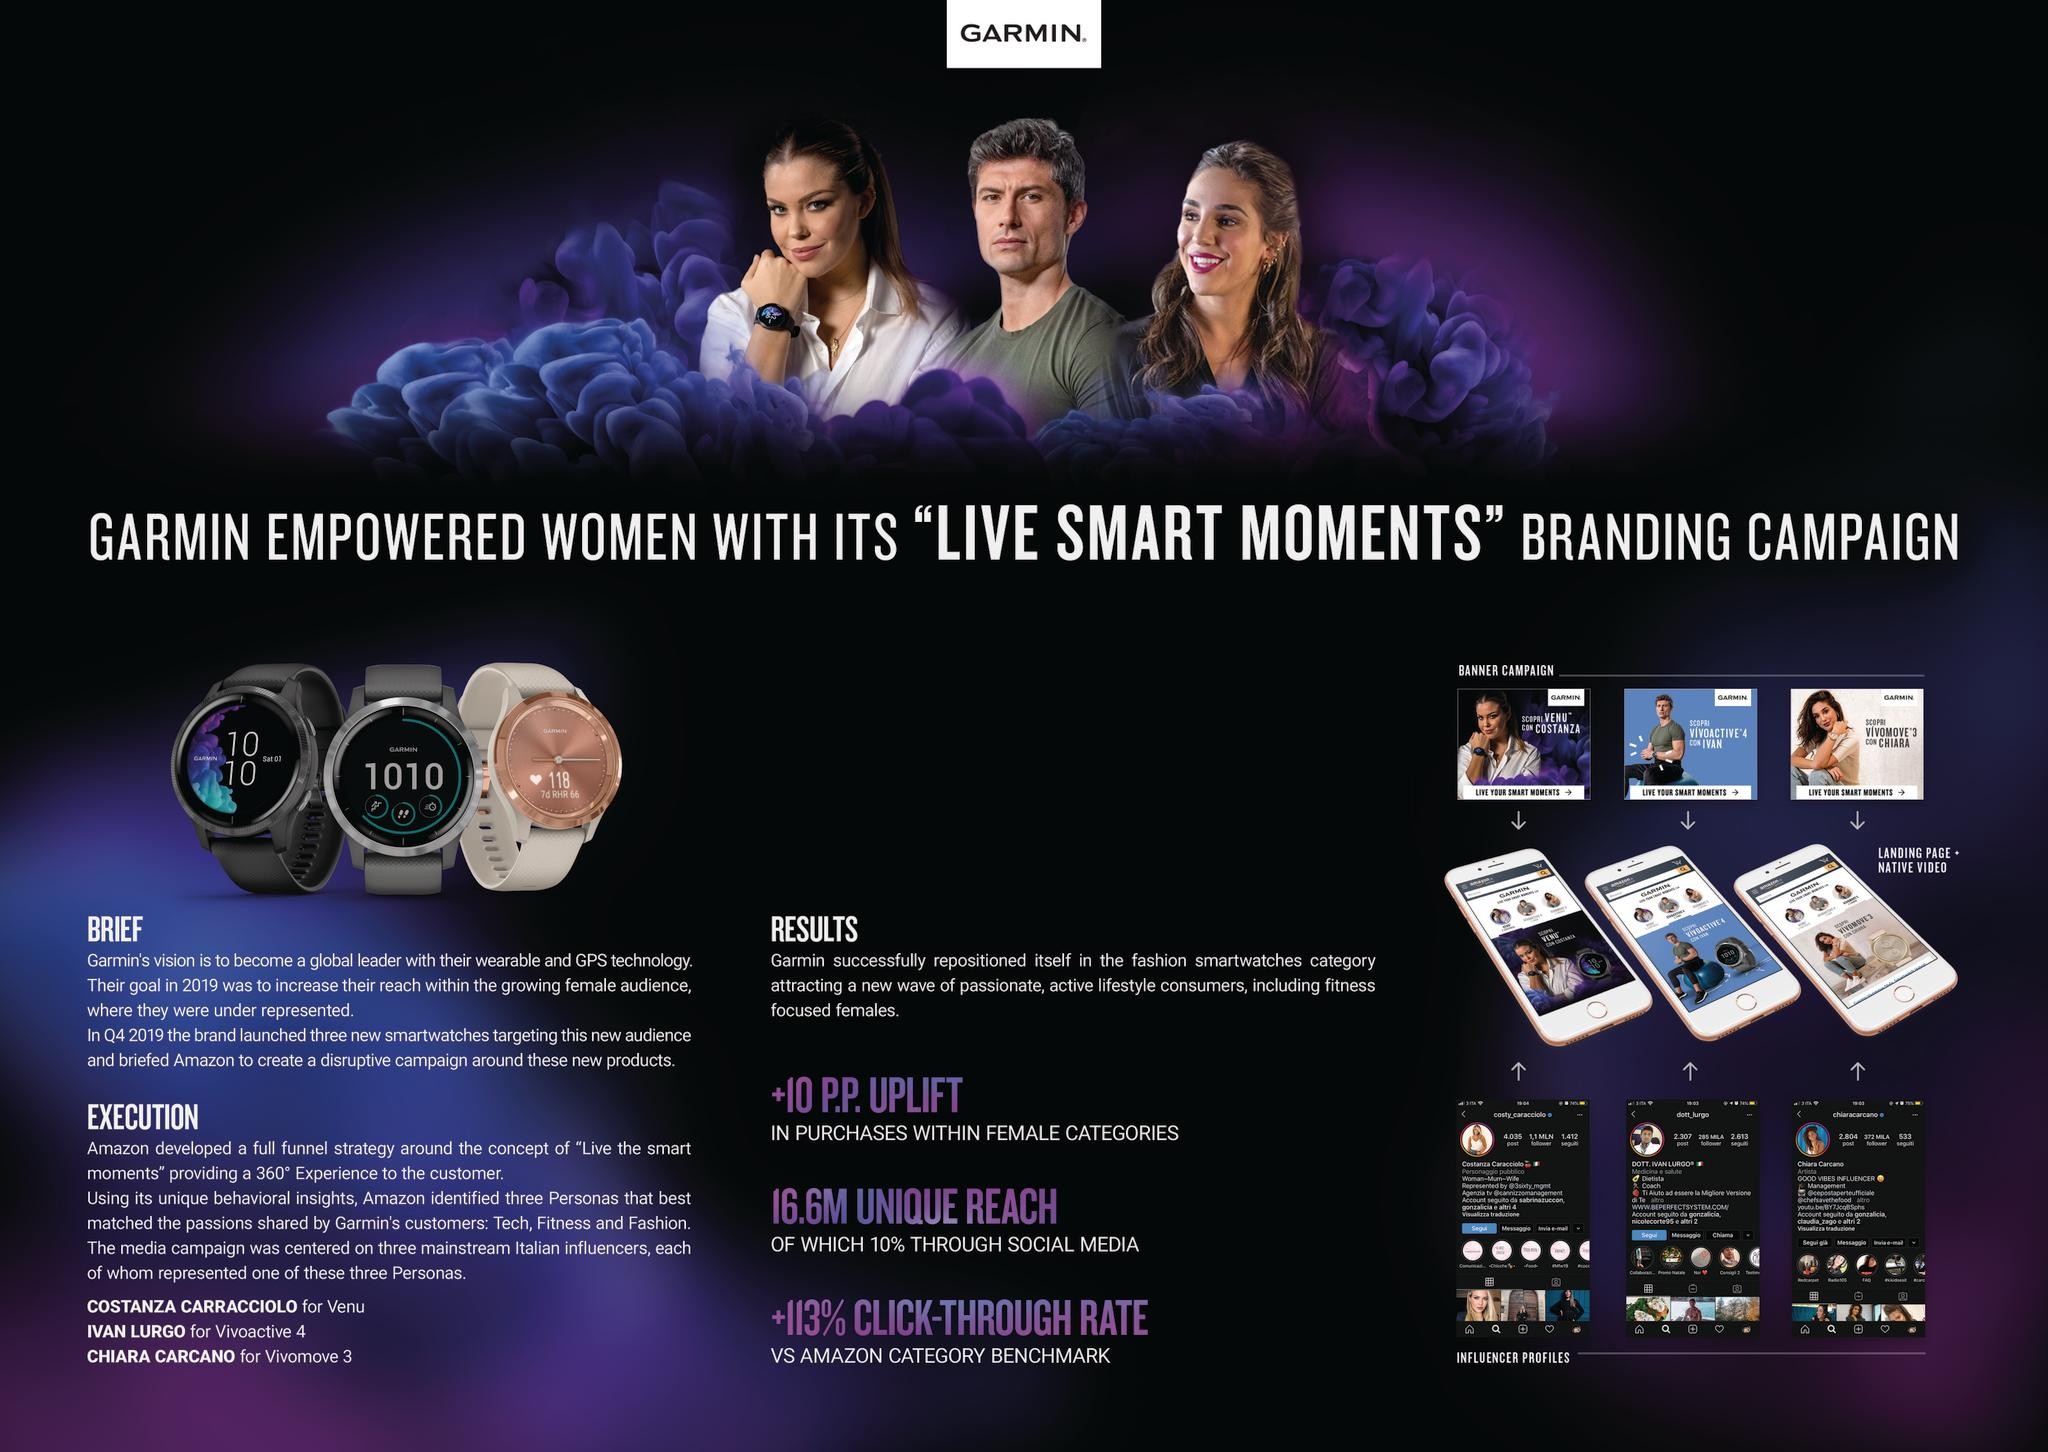 LIVE THE SMART MOMENTS CAMPAIGN